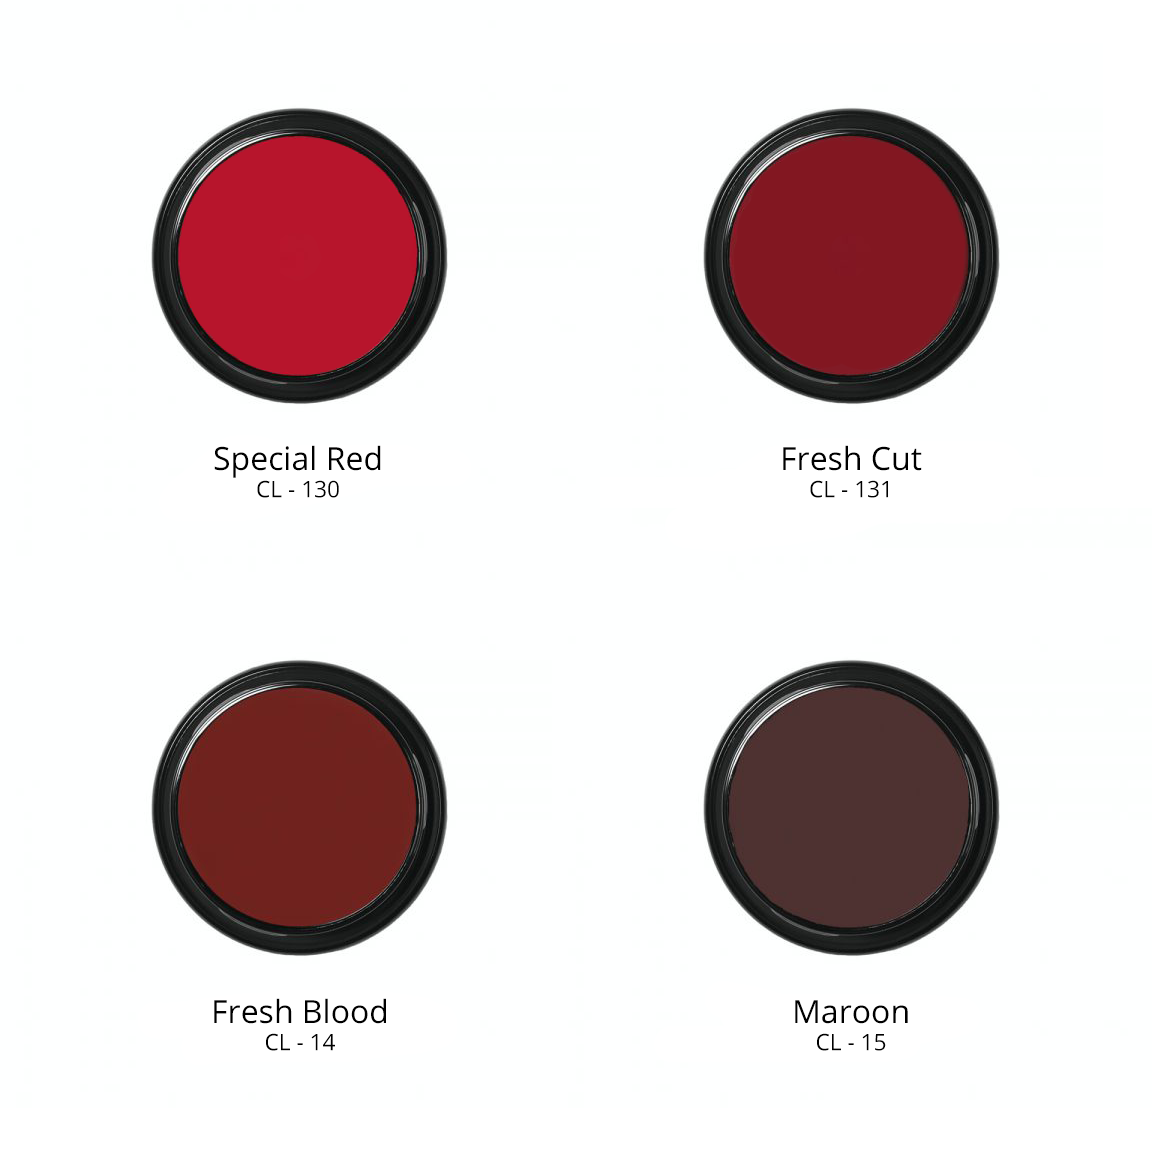 Ben Nye Creme Colors in special red CL - 130, Fresh Cut CL - 131, Fresh Blood CL - 14, and Maroon CL - 15.